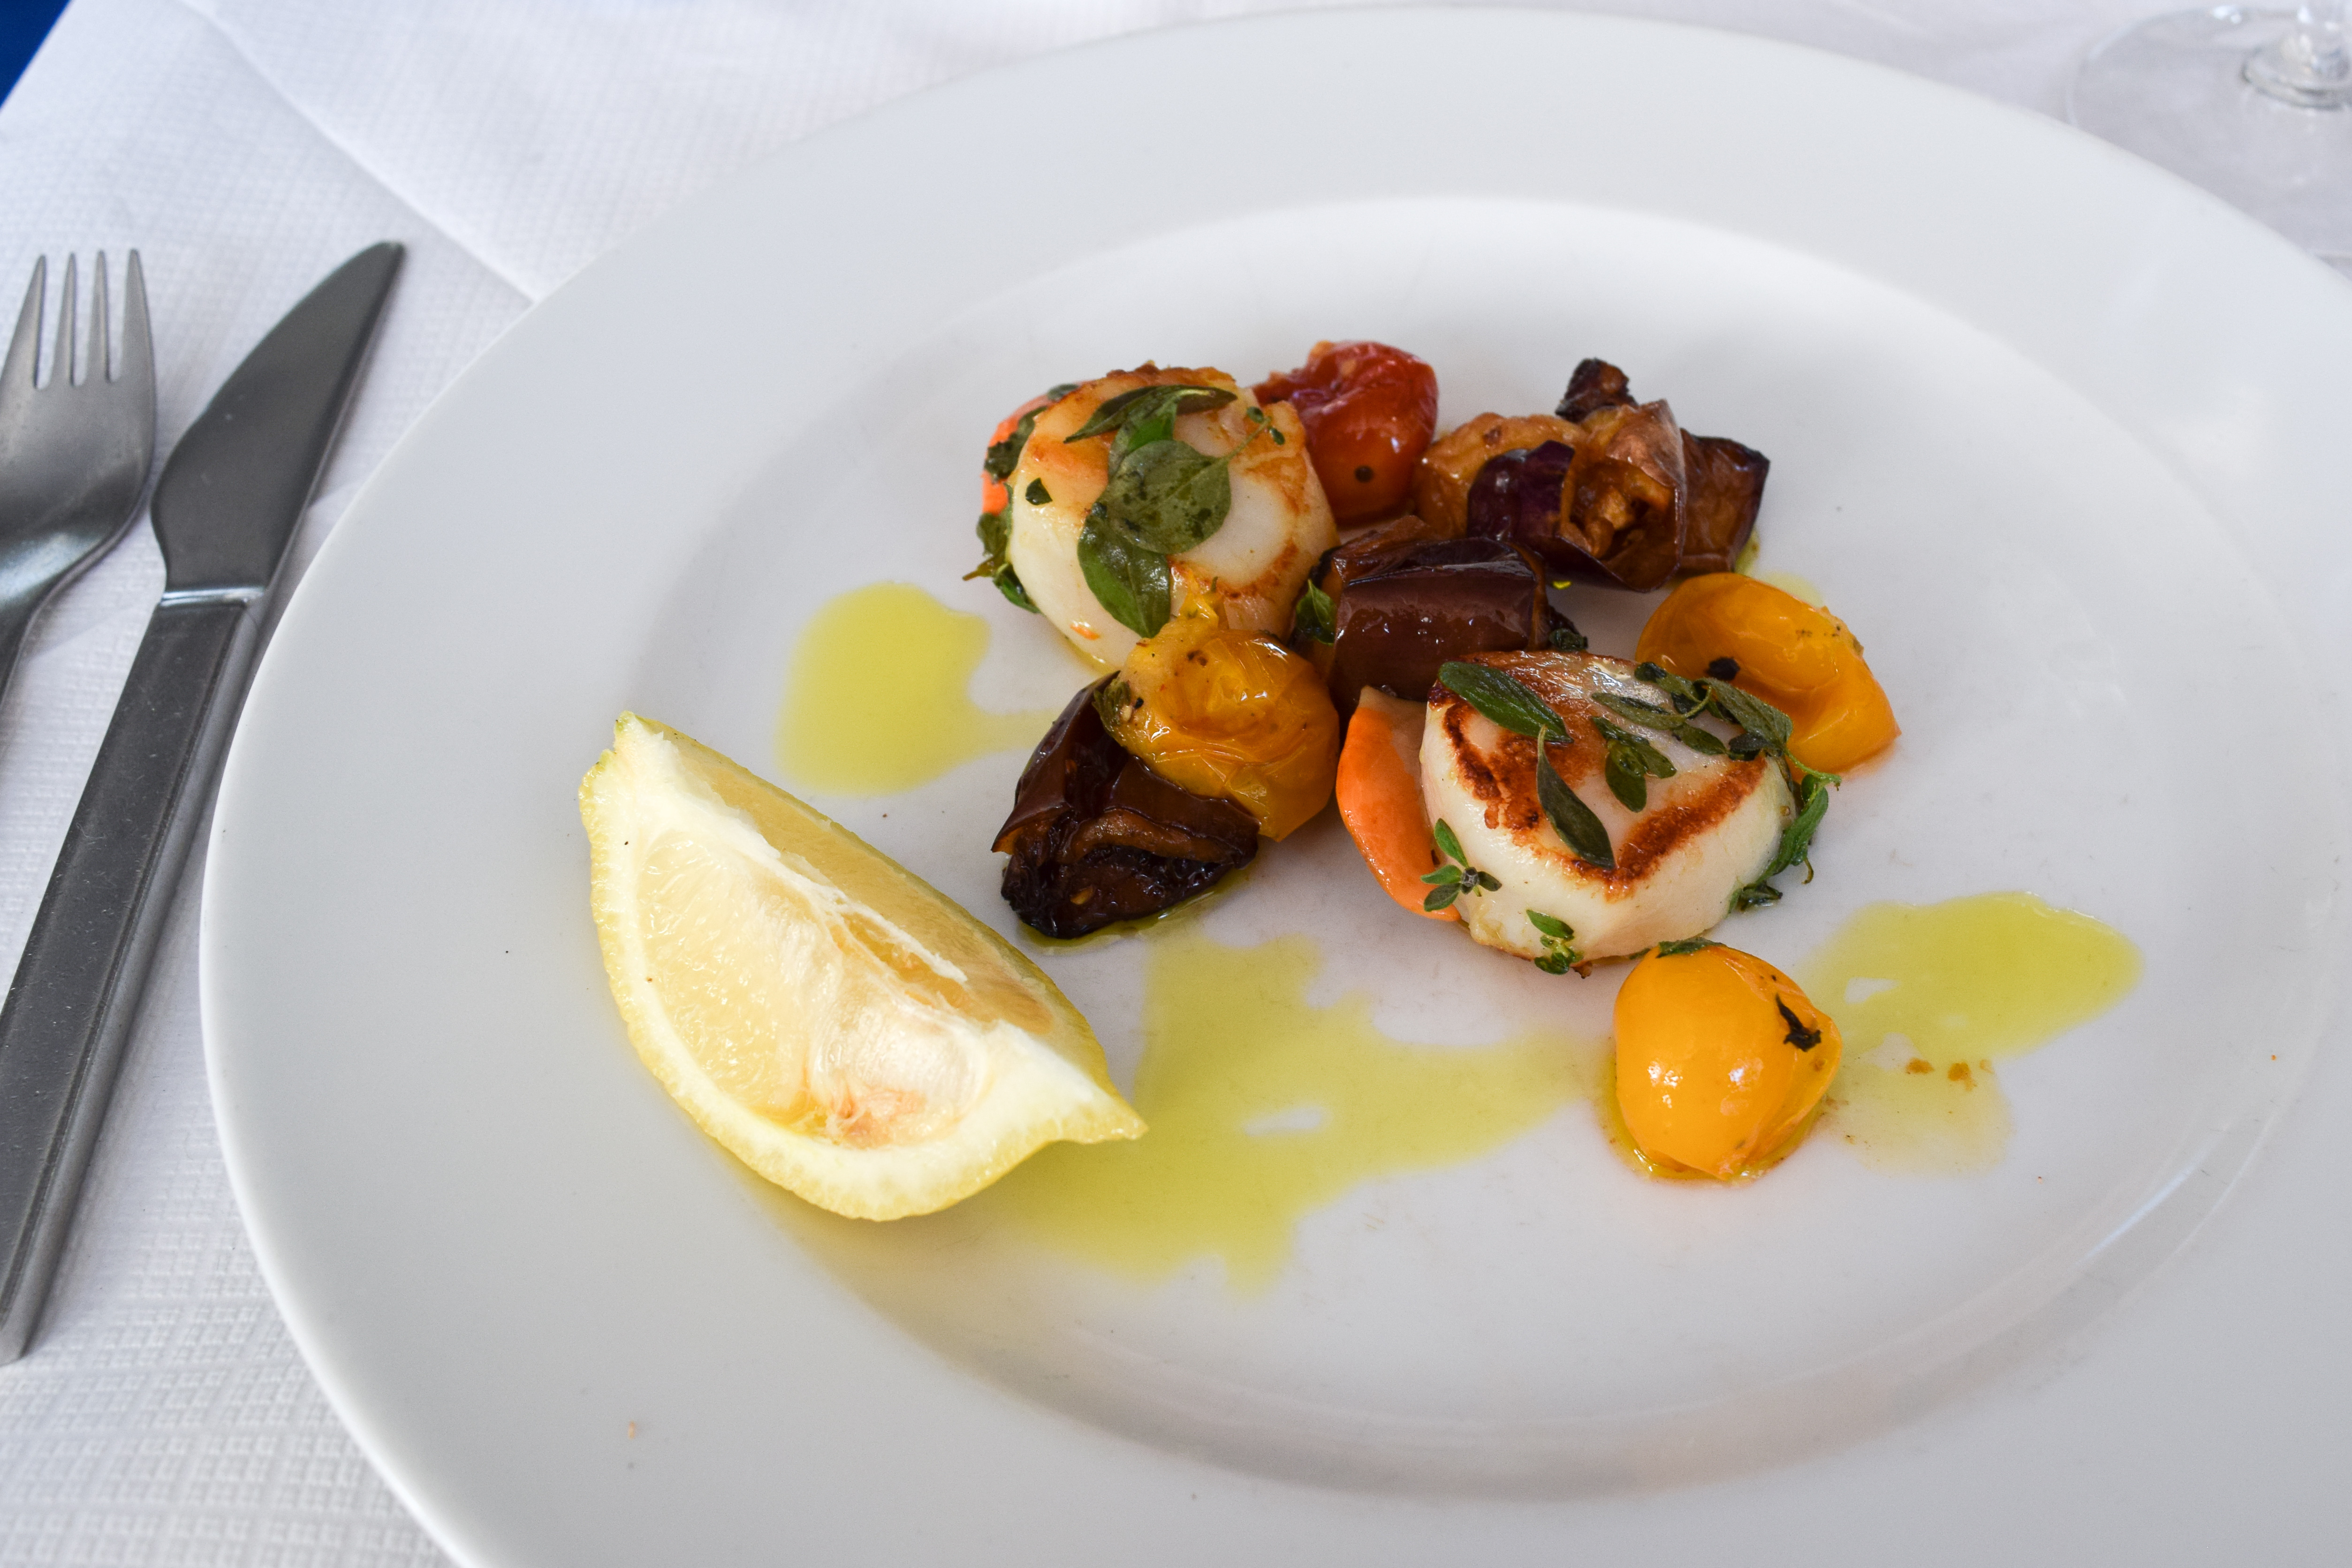 Seared Scottish Scallops with Pale Aubergine, Marjoram, Capers and Tomatoes at The River Cafe, Hammersmith